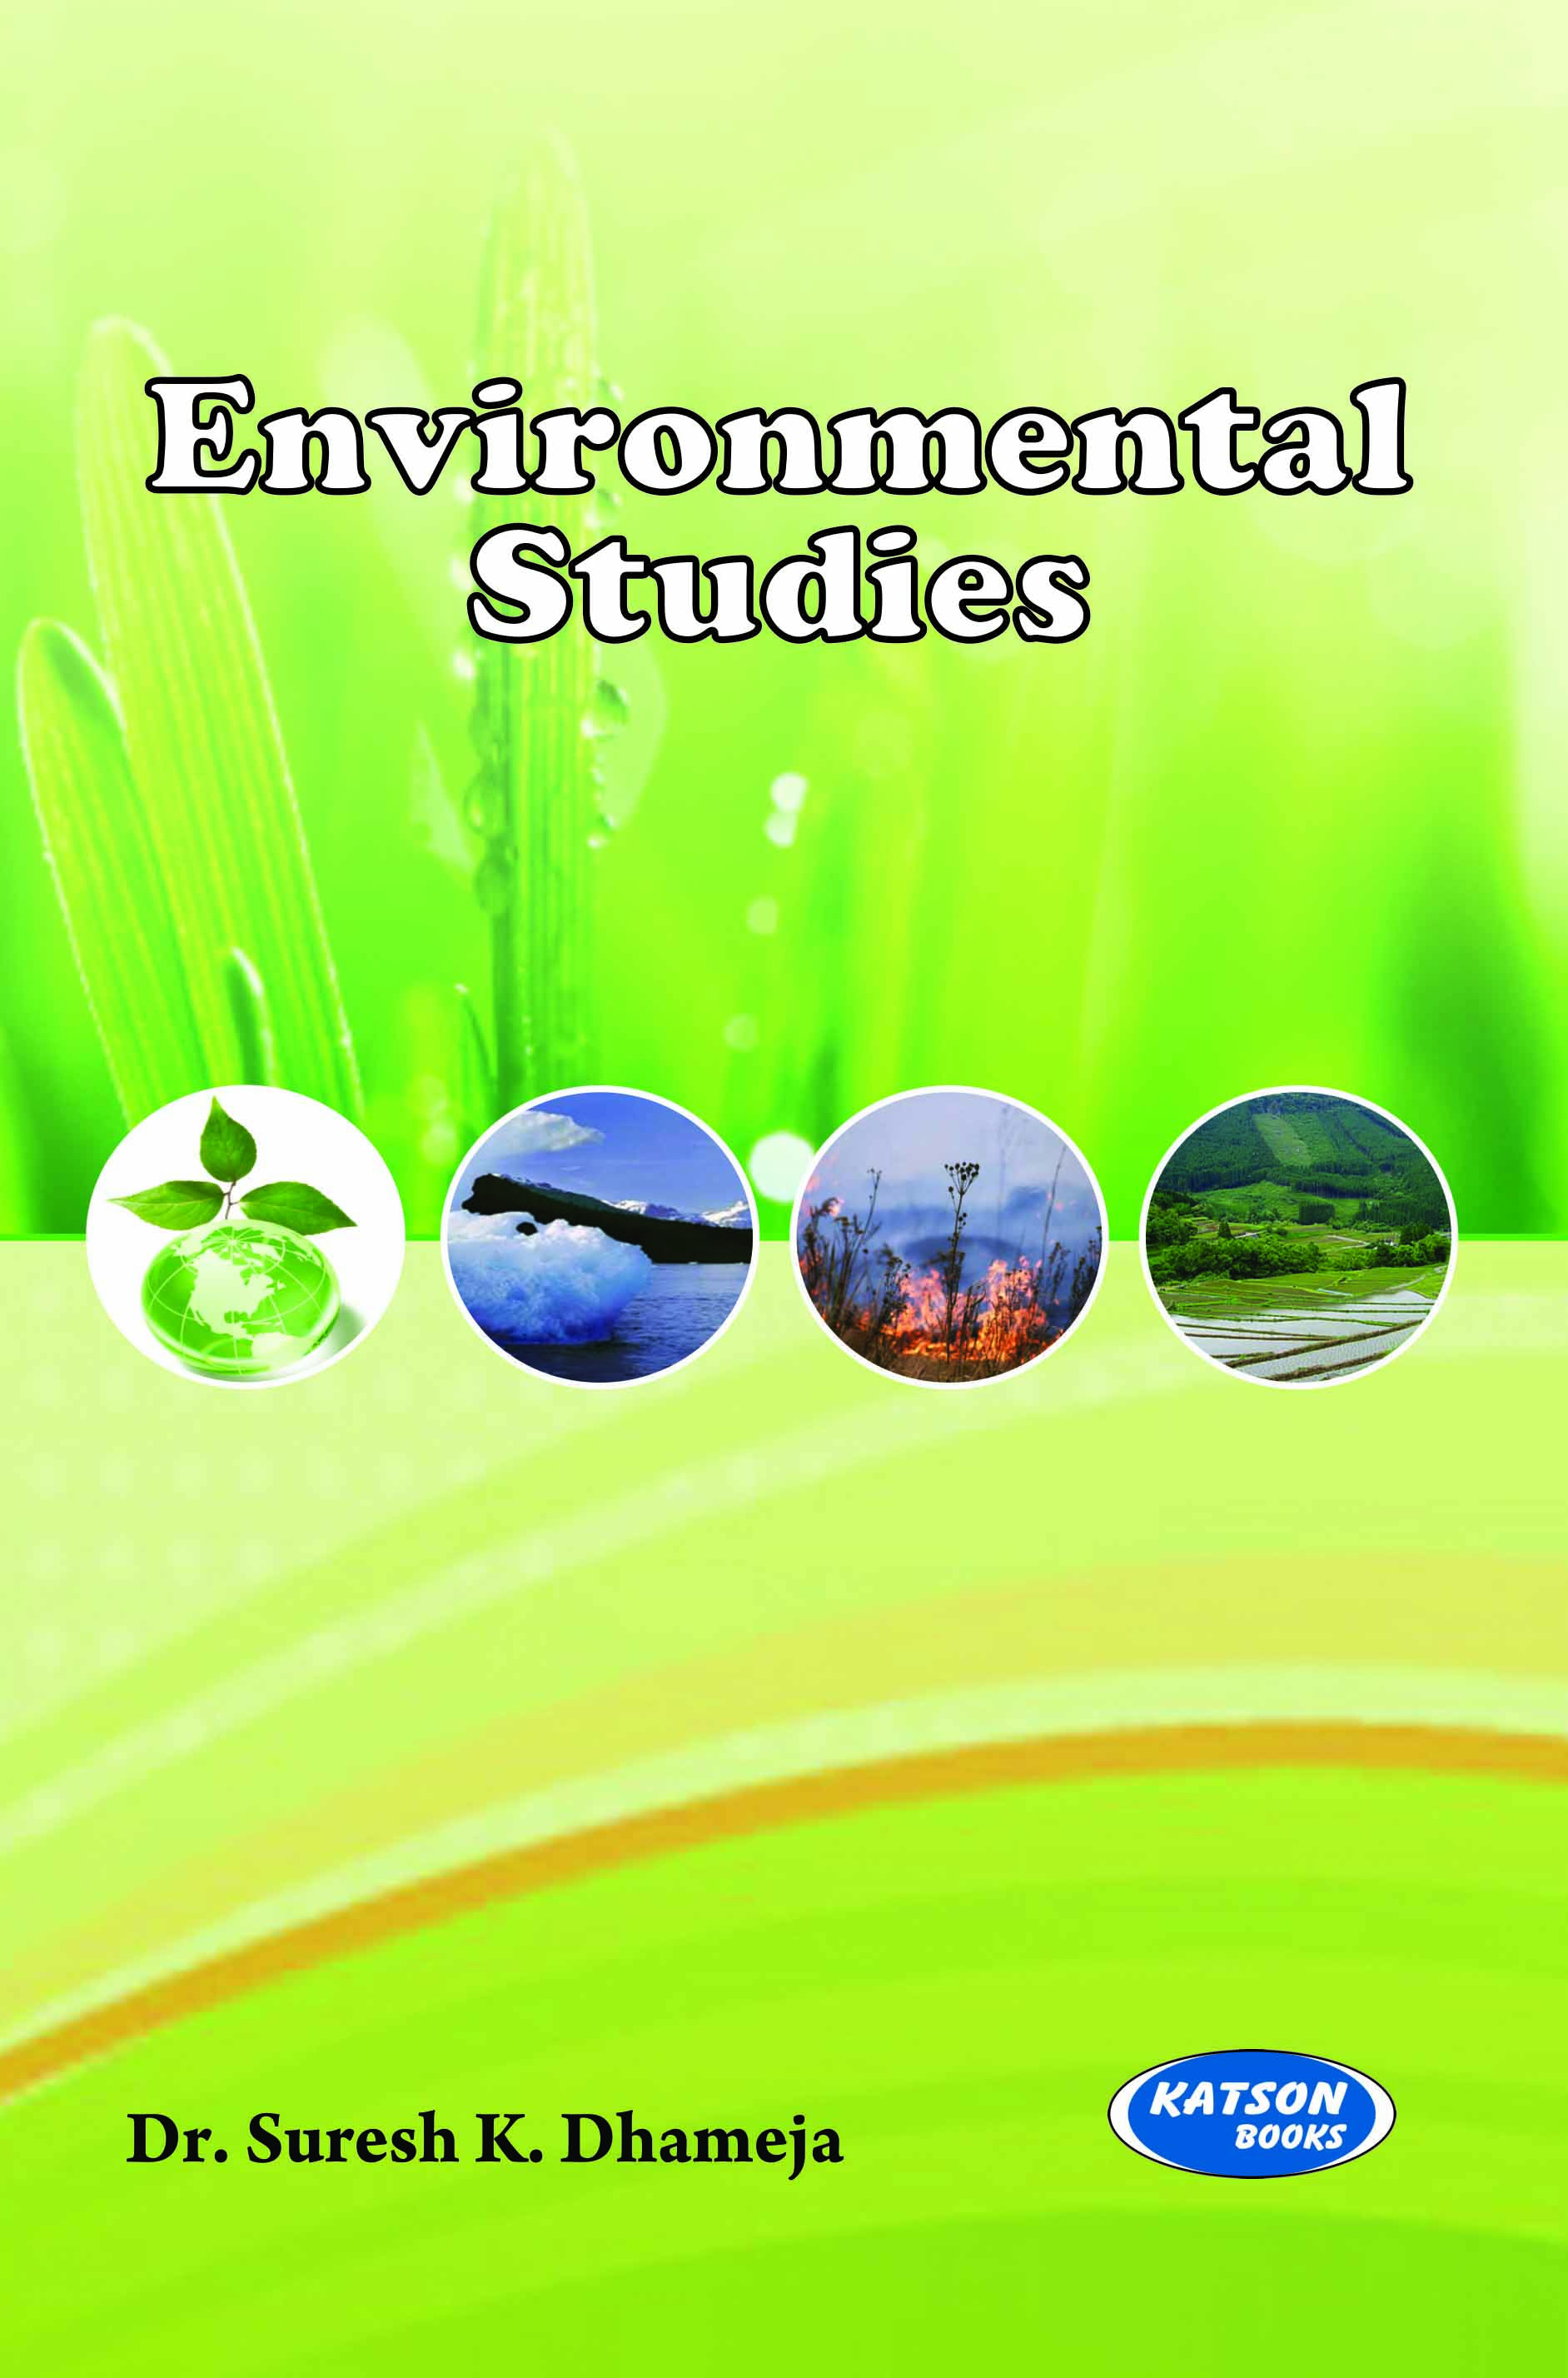 assignment on environmental